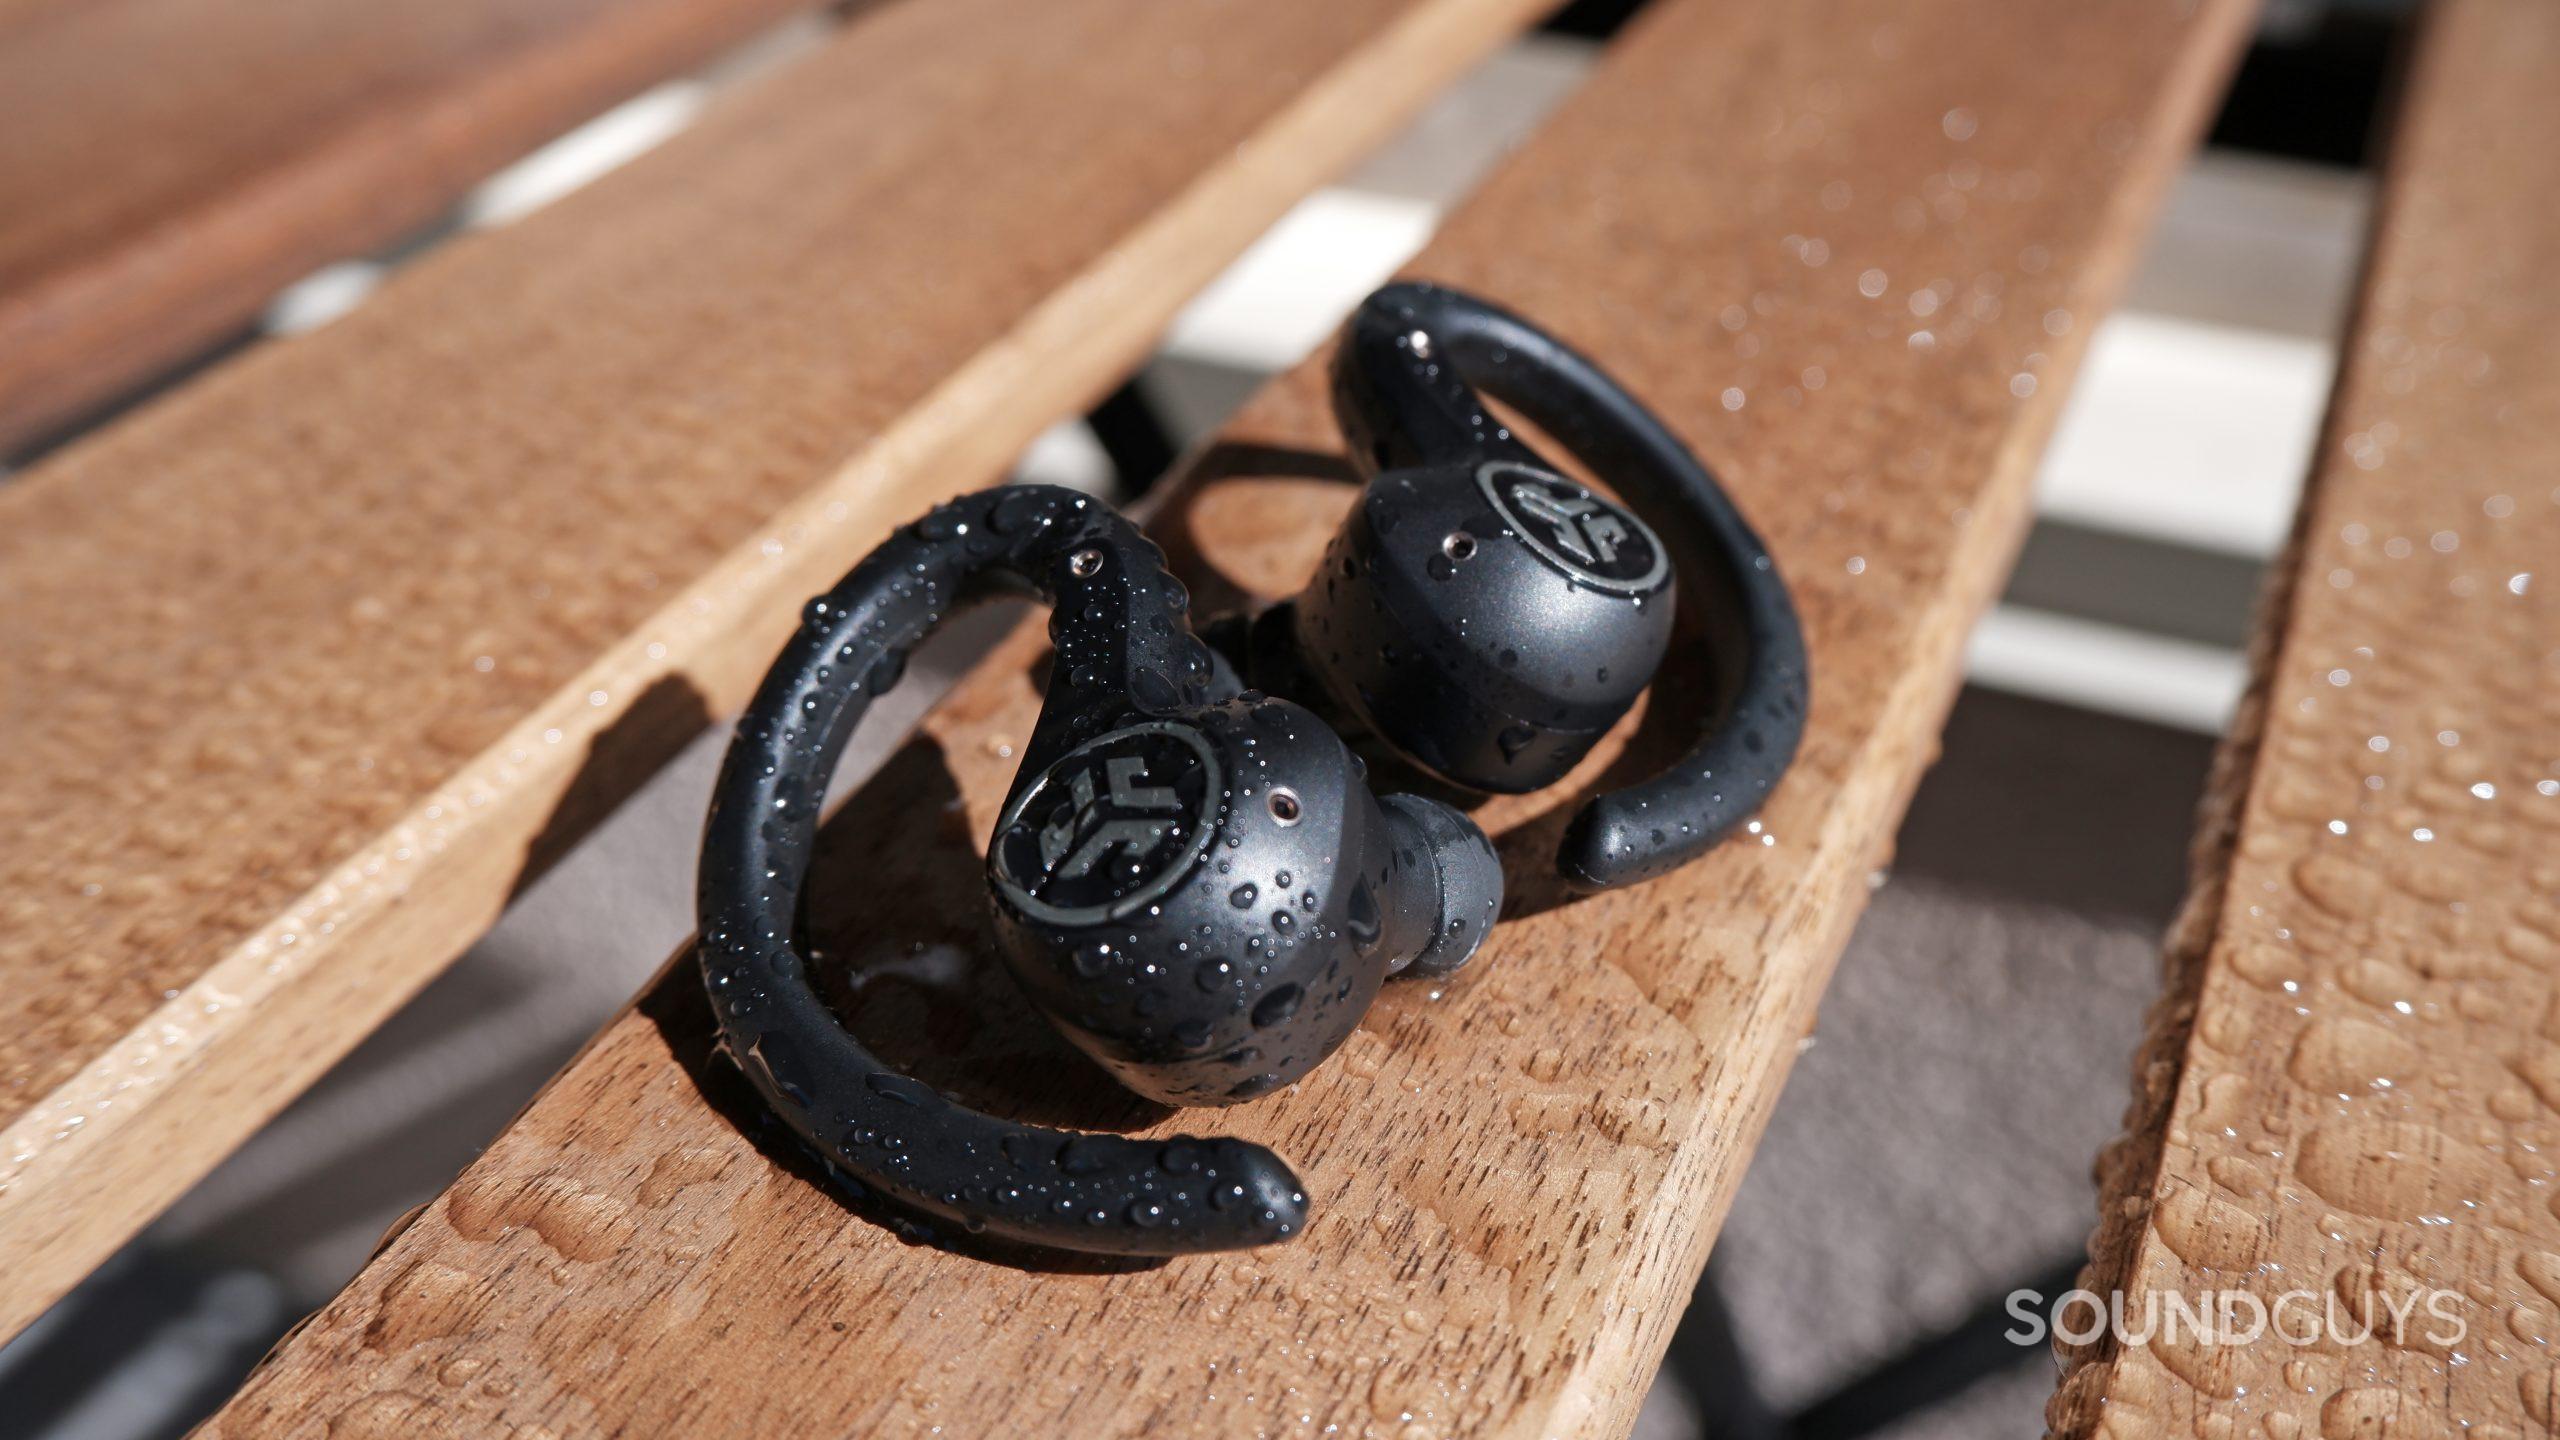 The JLab Epic Air Sport ANC on a wooden table ouside, with water droplets on the earbuds and table.